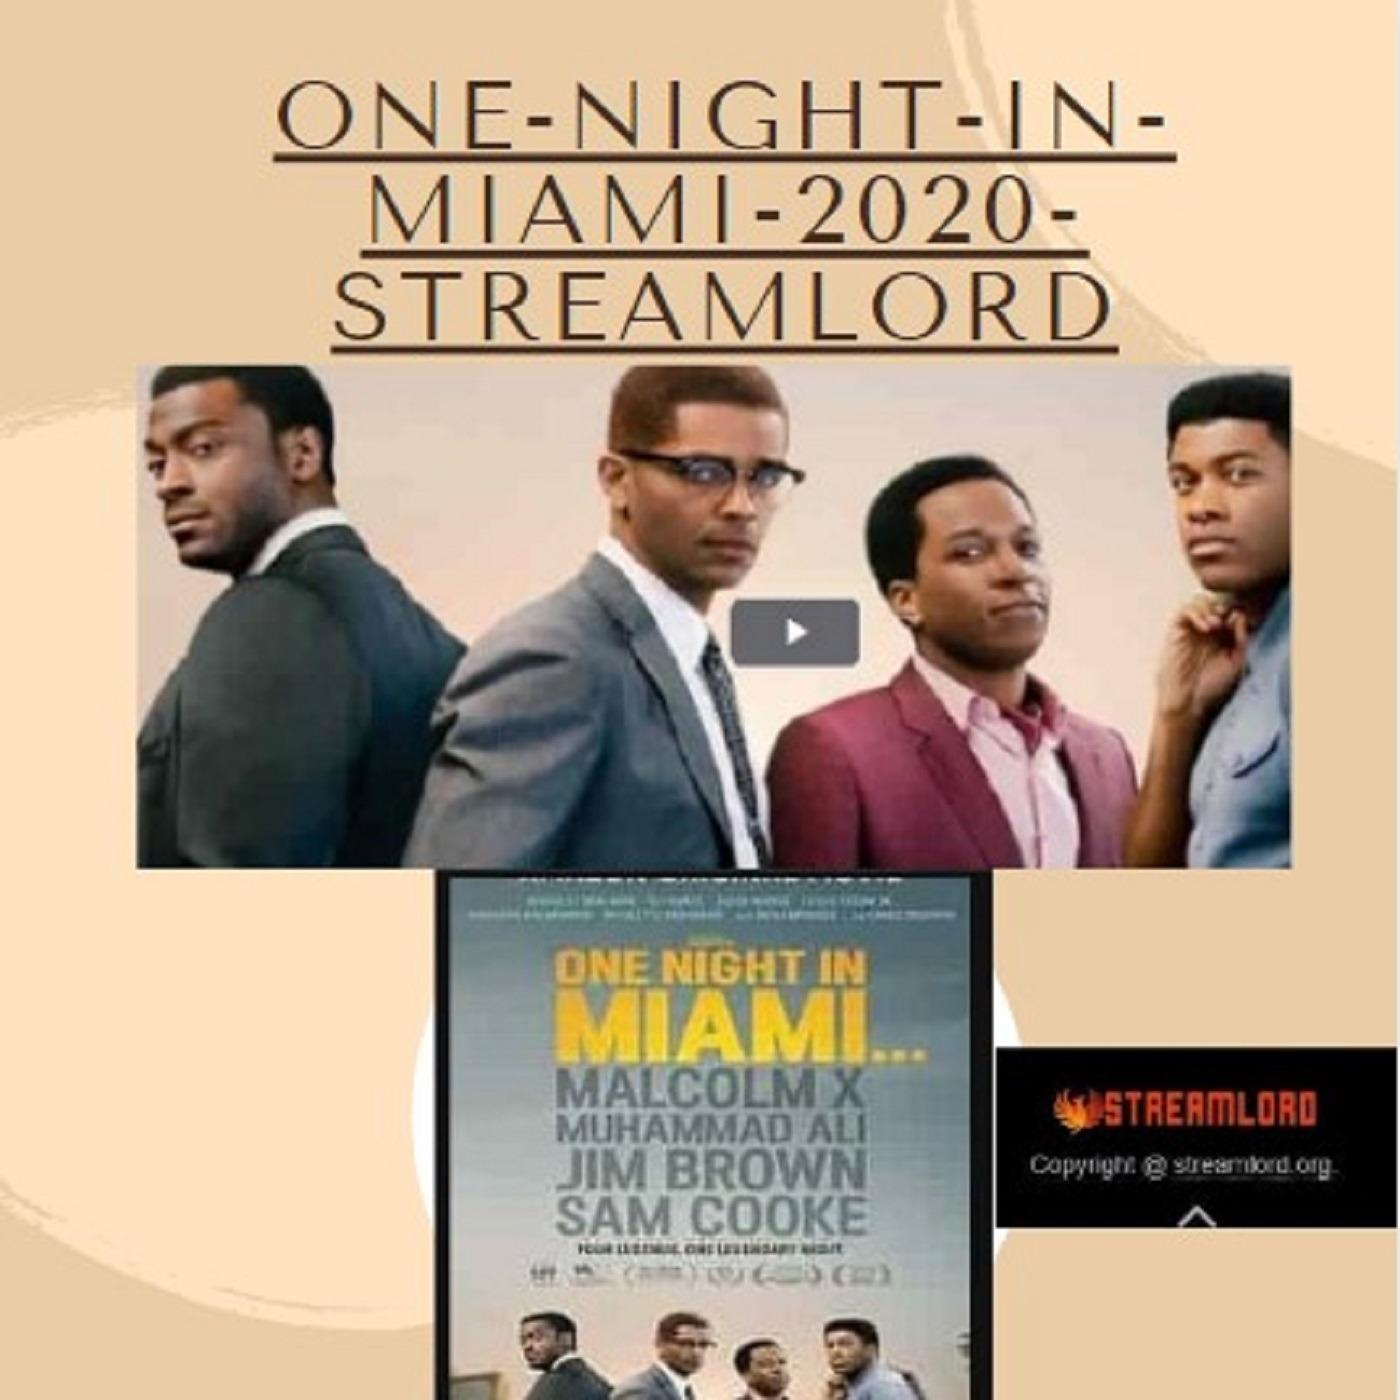 Plan to watch movie at home one night in miami 2020 streamlord